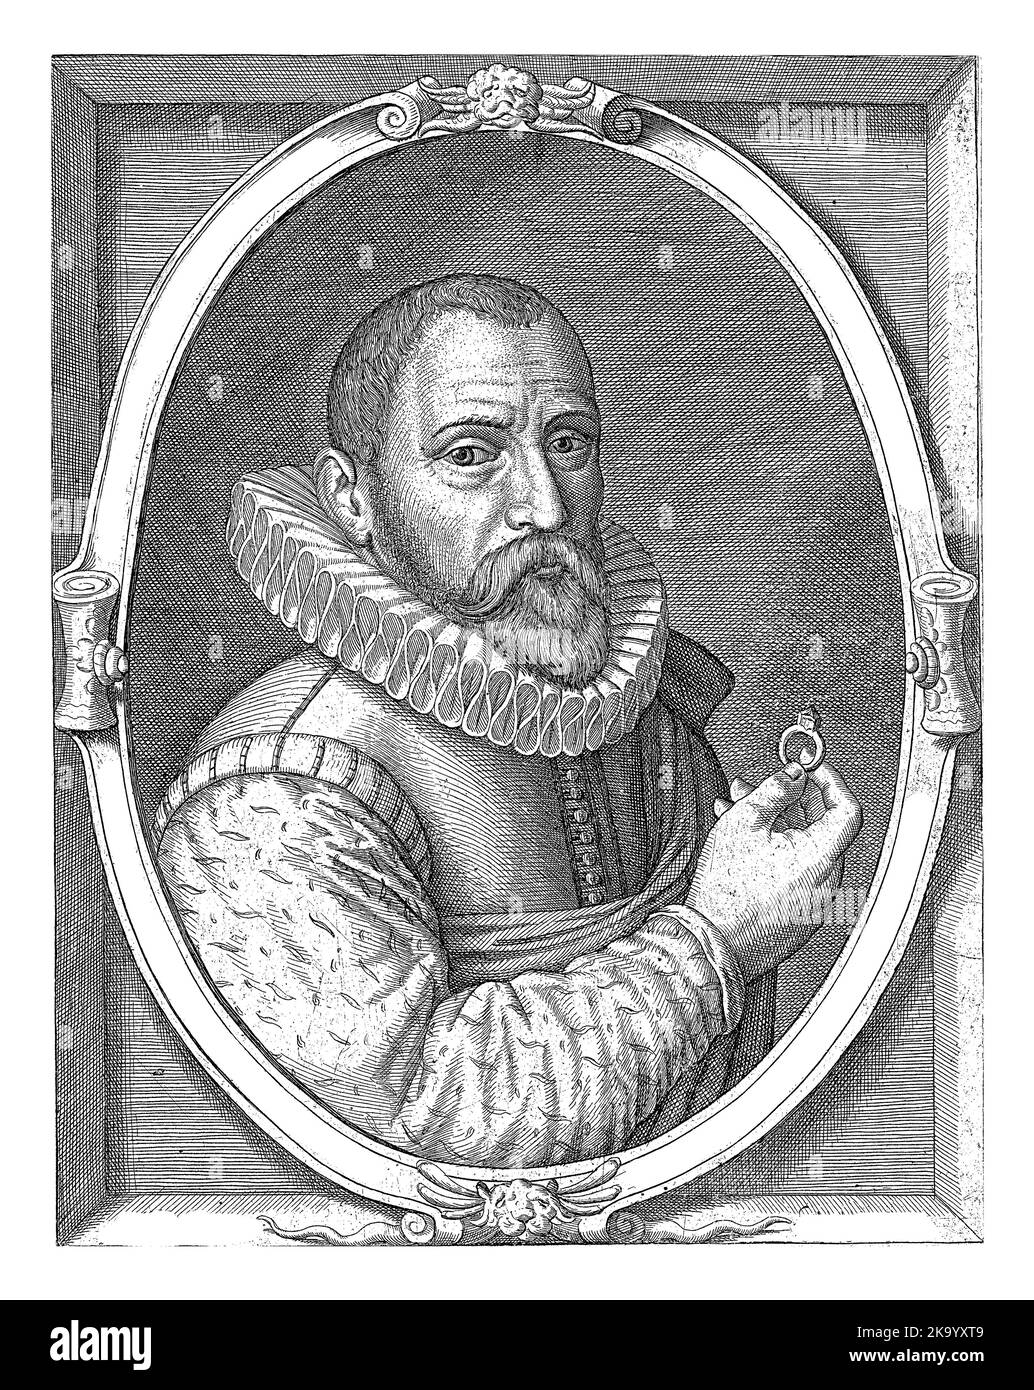 Portrait of Outgert Ariss van Akersloot at the age of 44, Willem Outgertsz. Akersloot, 1620 Half-length portrait, bareheaded, with beard and mustaches Stock Photo